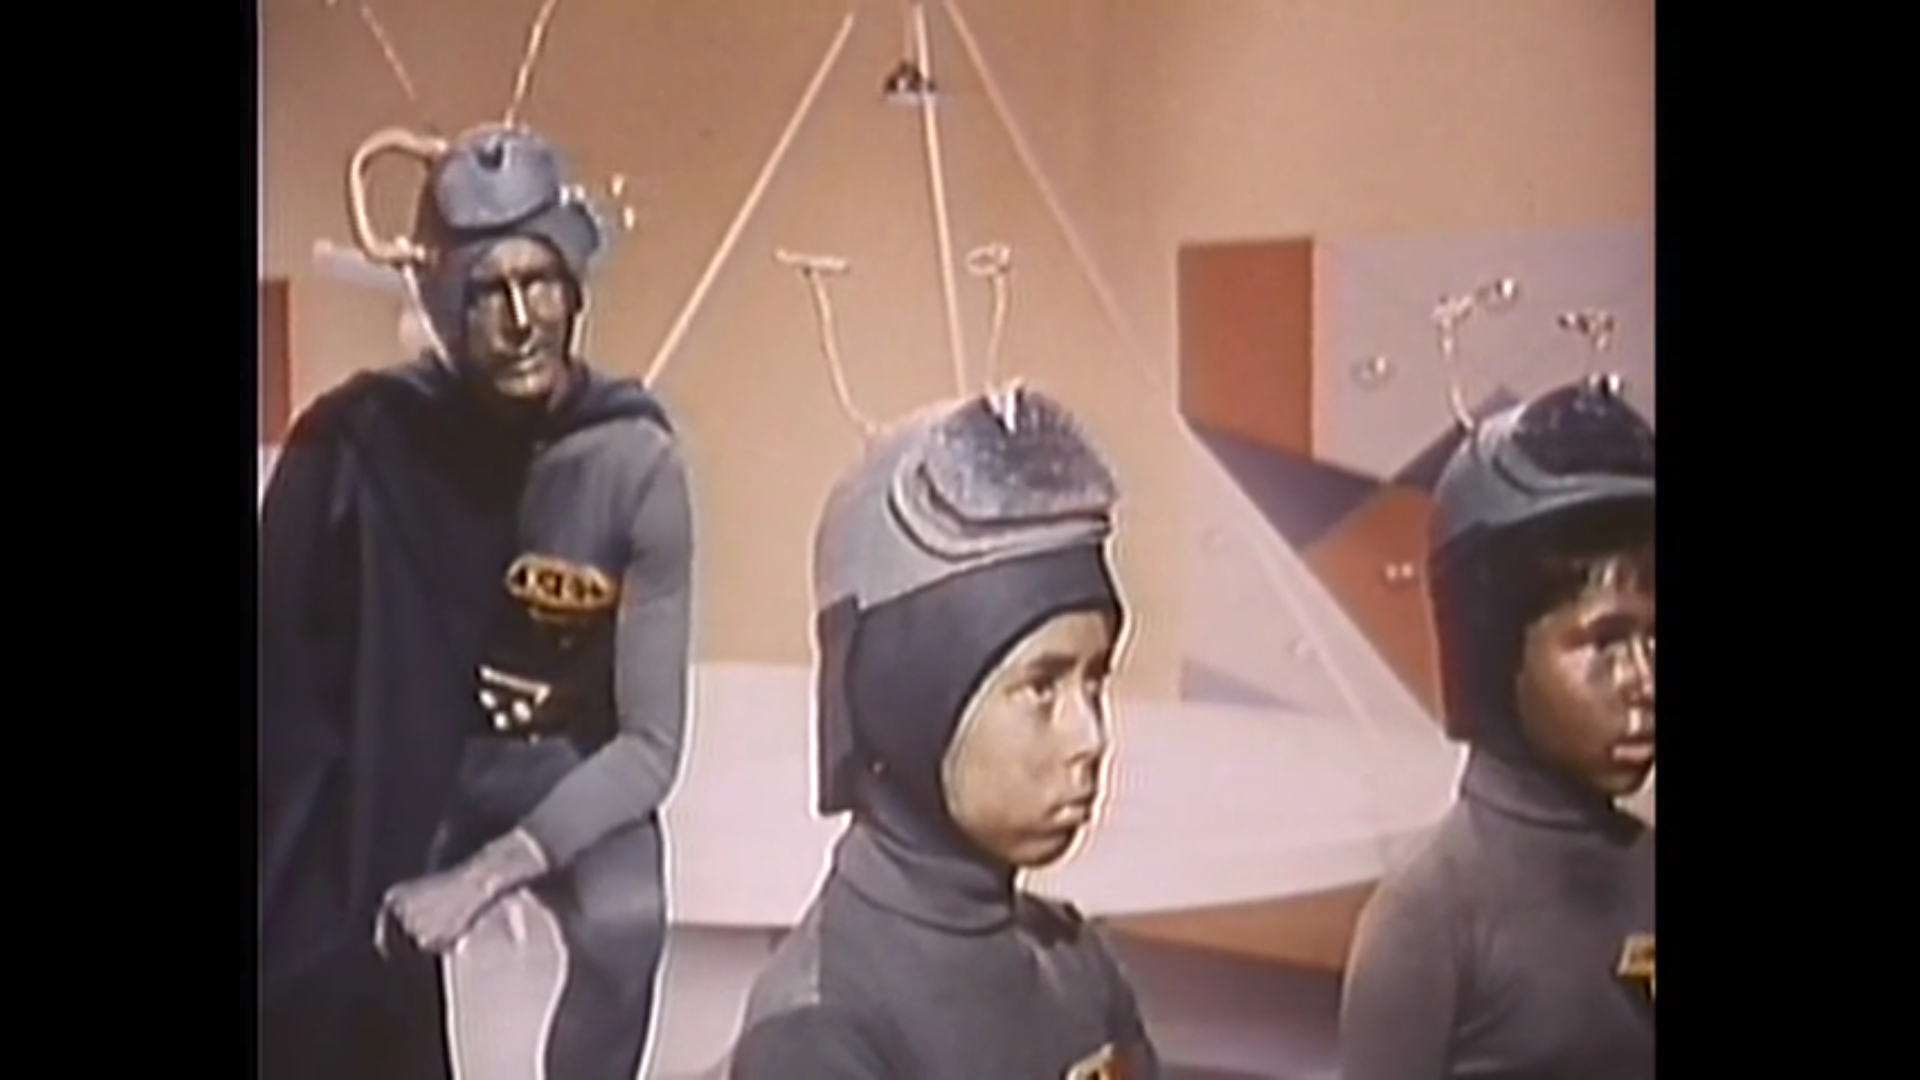 two boys in matching blue costumes and helmets stand while a man dressed identically sits in the background